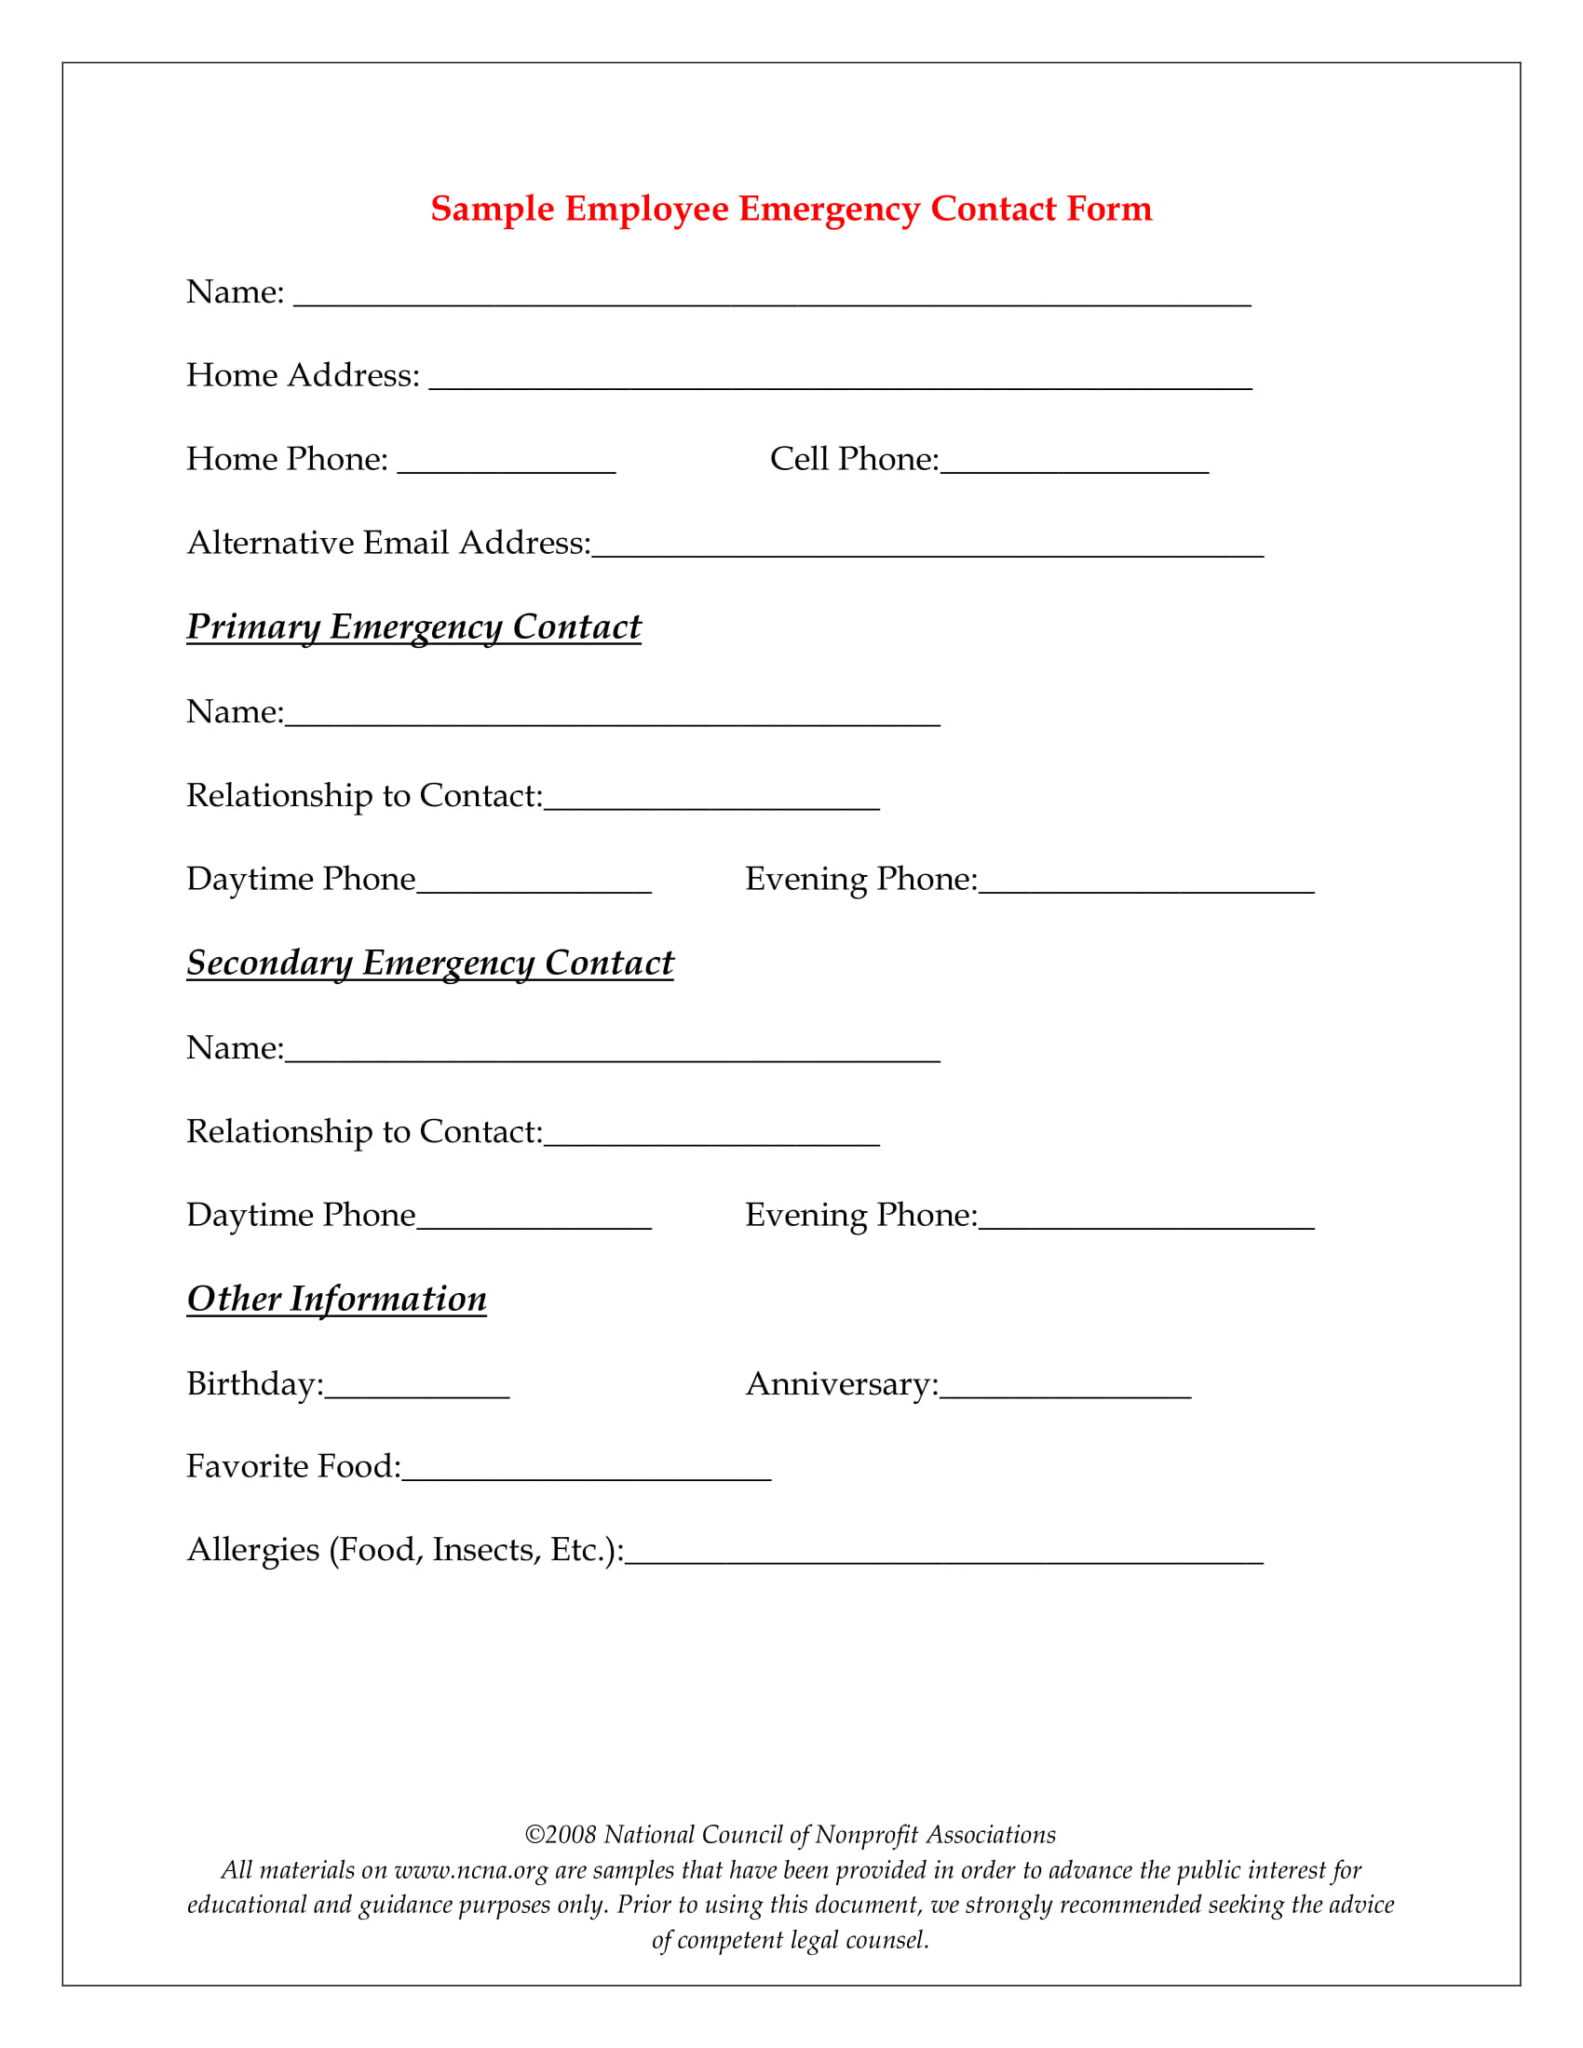 emergency-contact-card-template-great-professional-templates-riset